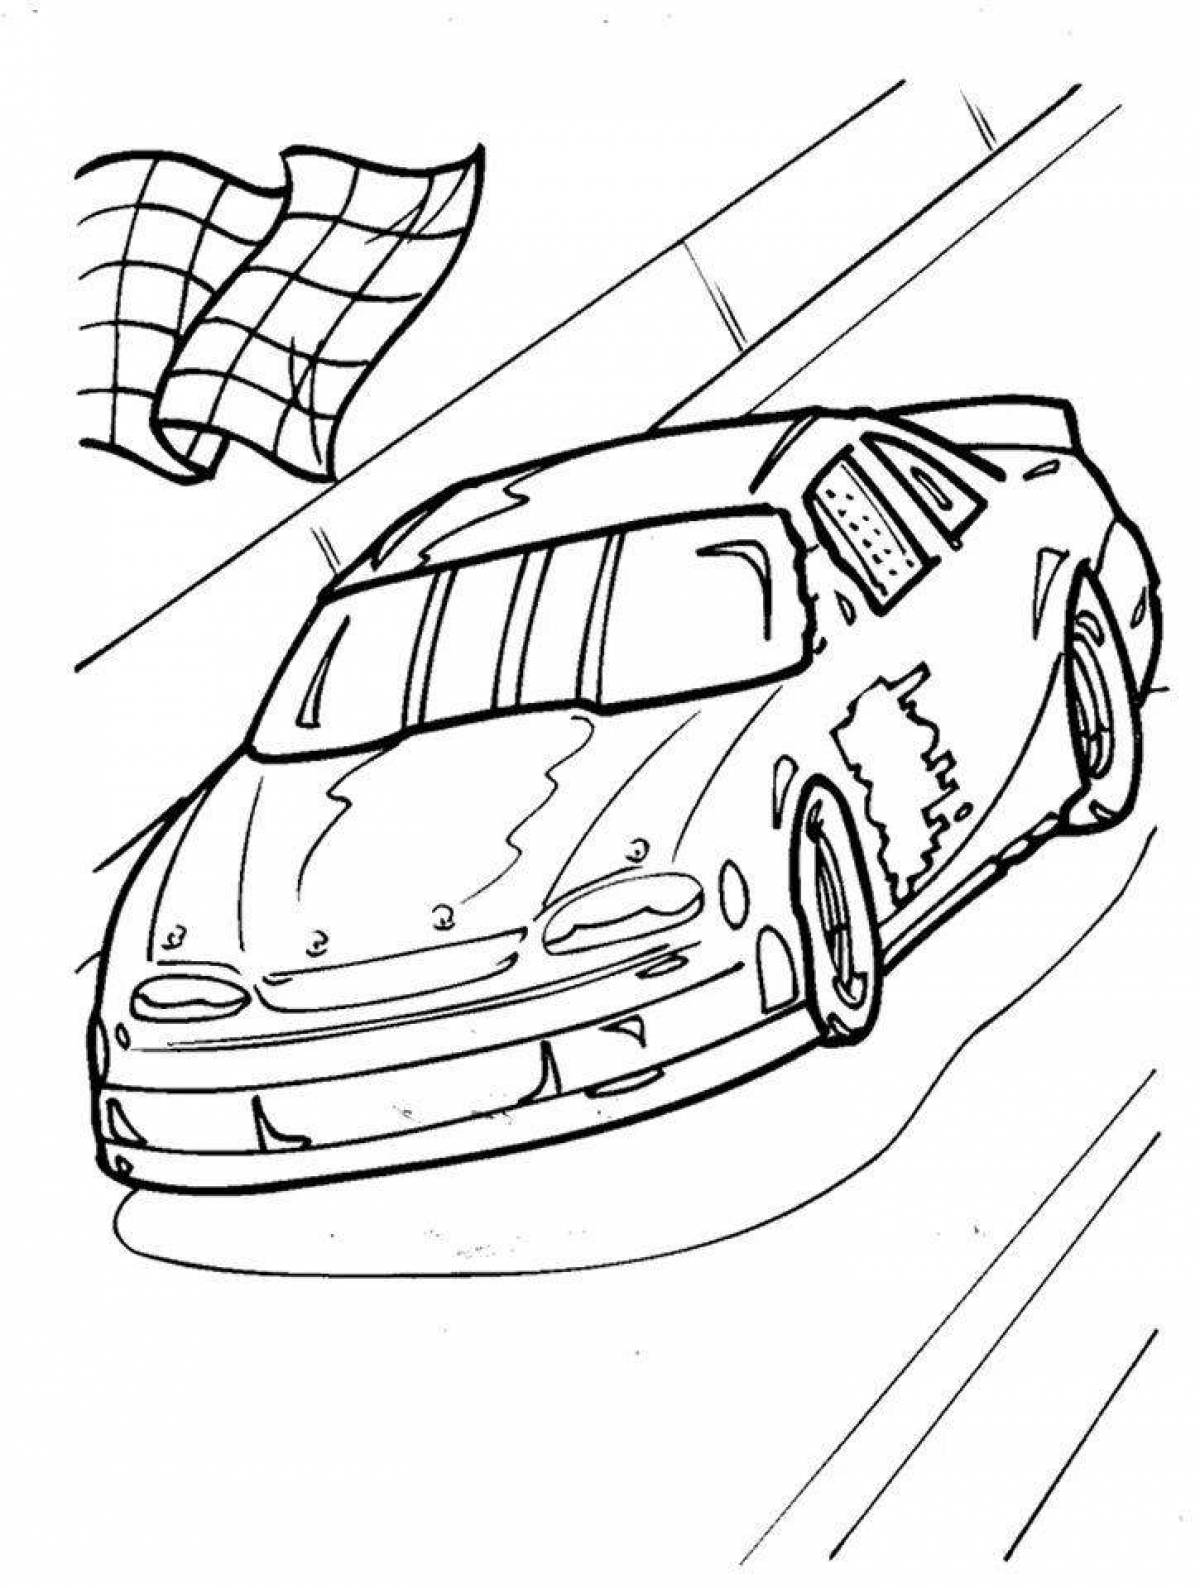 Dazzling turn on car coloring page